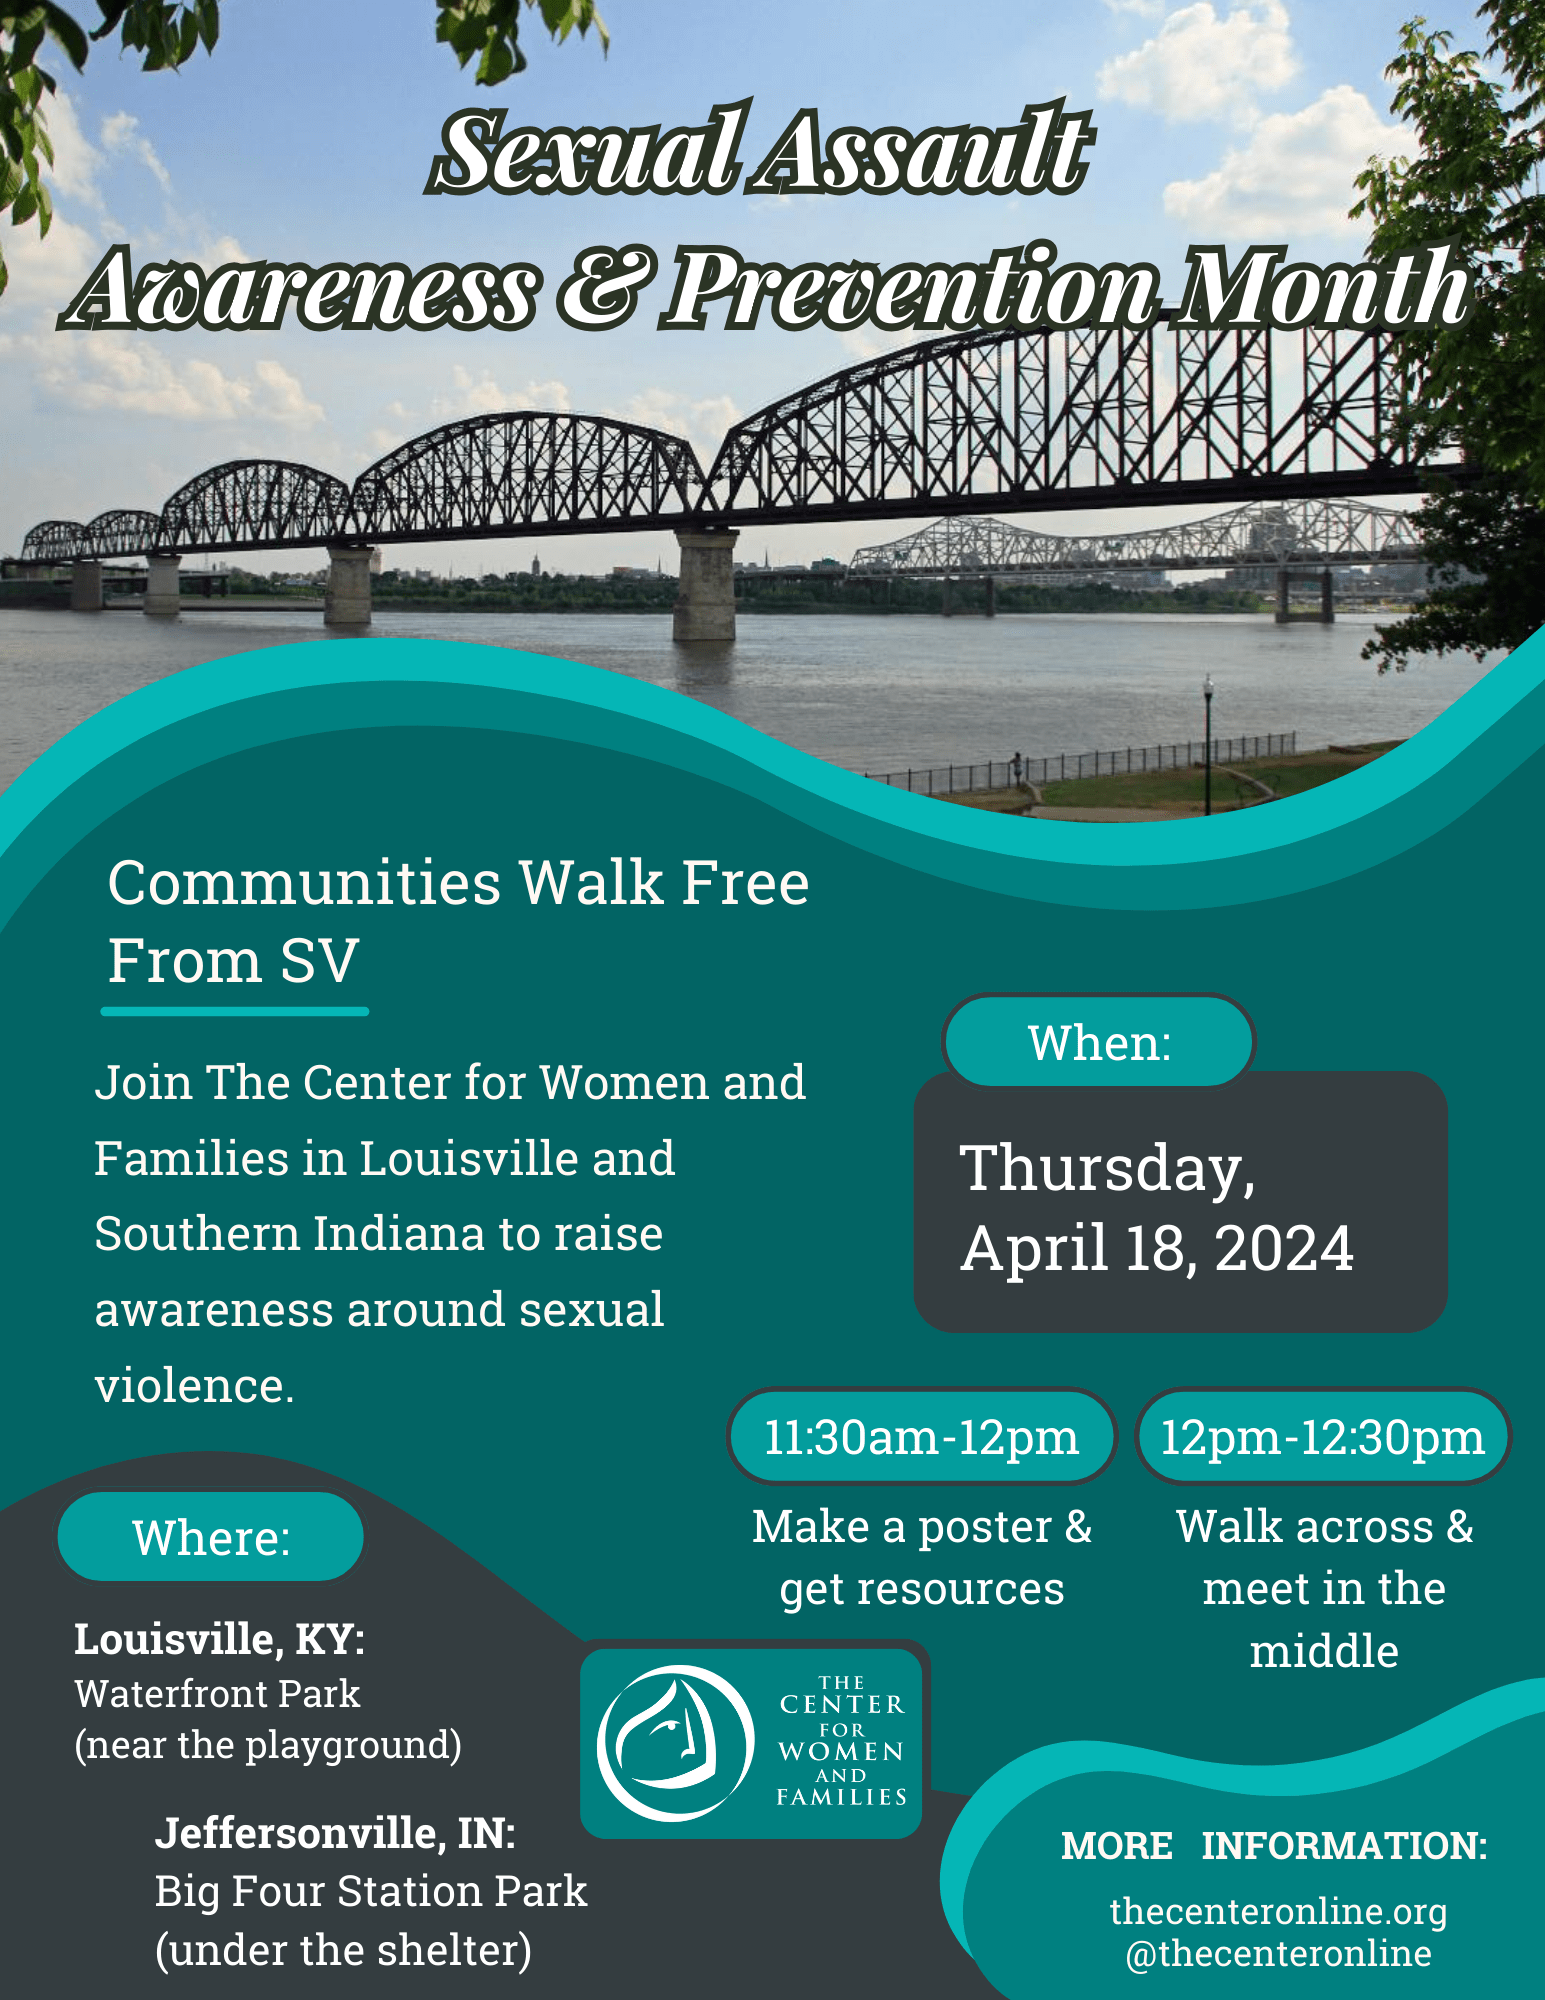 illustration of Indiana Big 4 bridge with invitation to attend Walk on April 18 at noon in support of Sexual Assault Awarness Month.